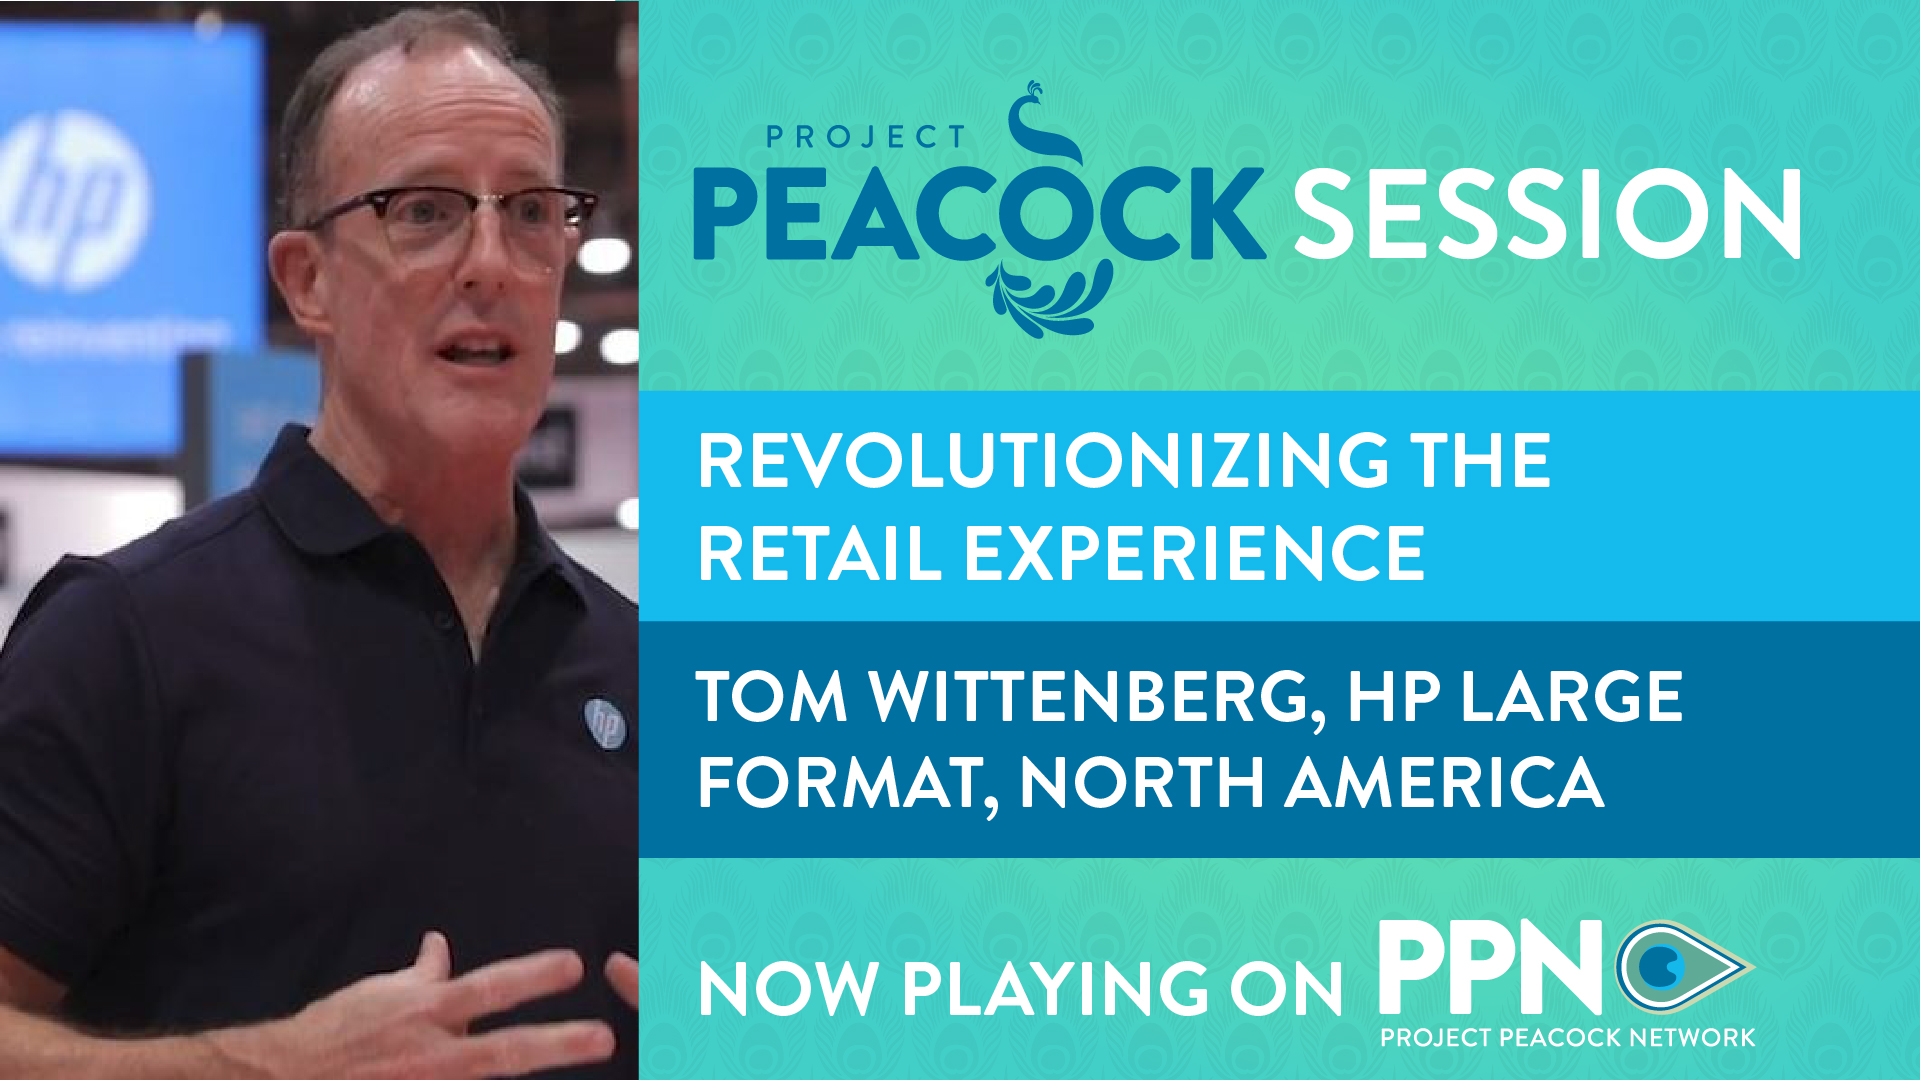 PROJECT PEACOCK: REVOLUTIONIZING THE RETAIL EXPERIENCE